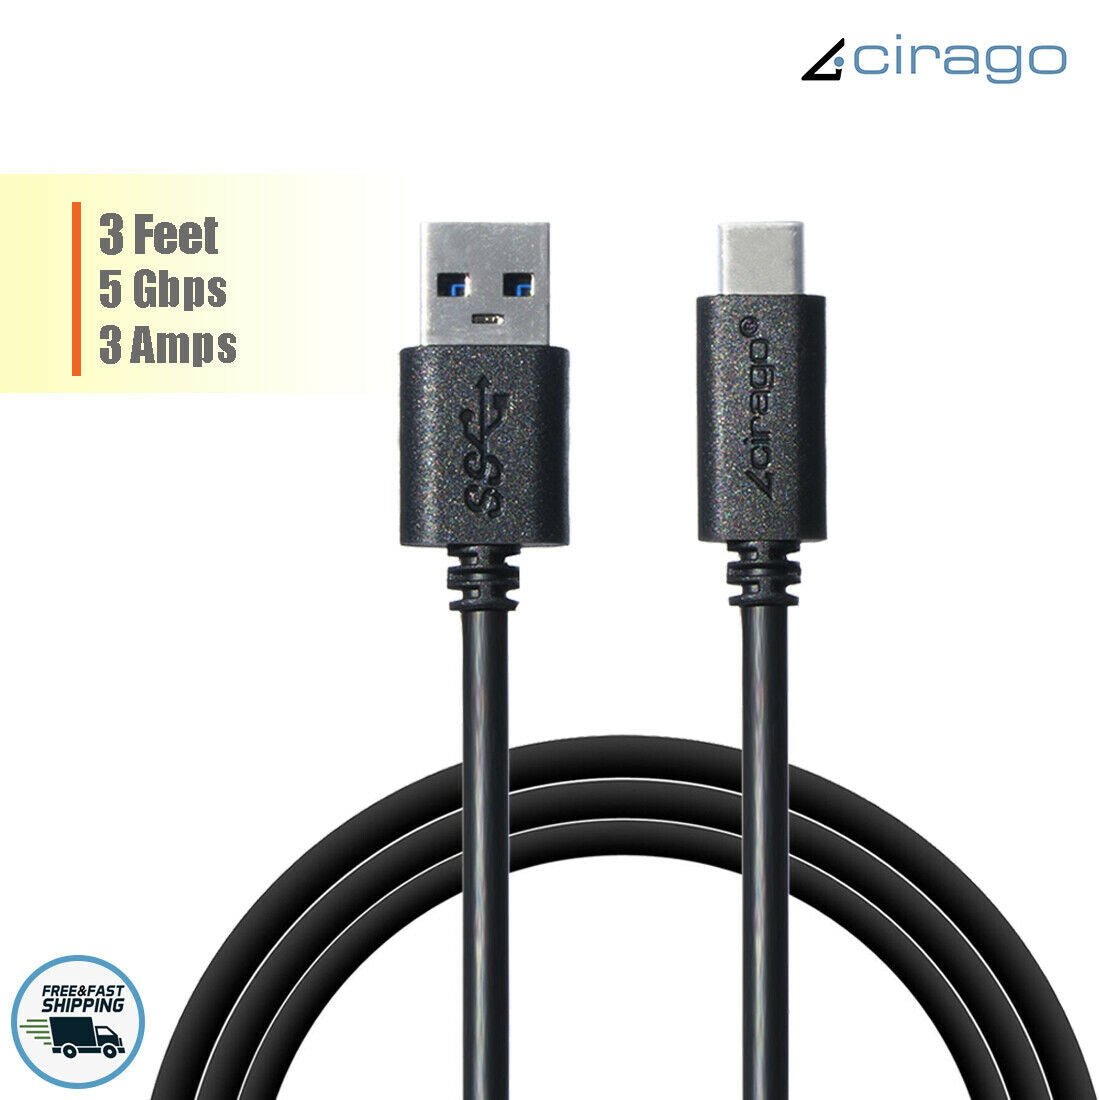 3ft USB to USB Sync / Charging Cable Charger Cord for Android Smartphone 5Gb/s